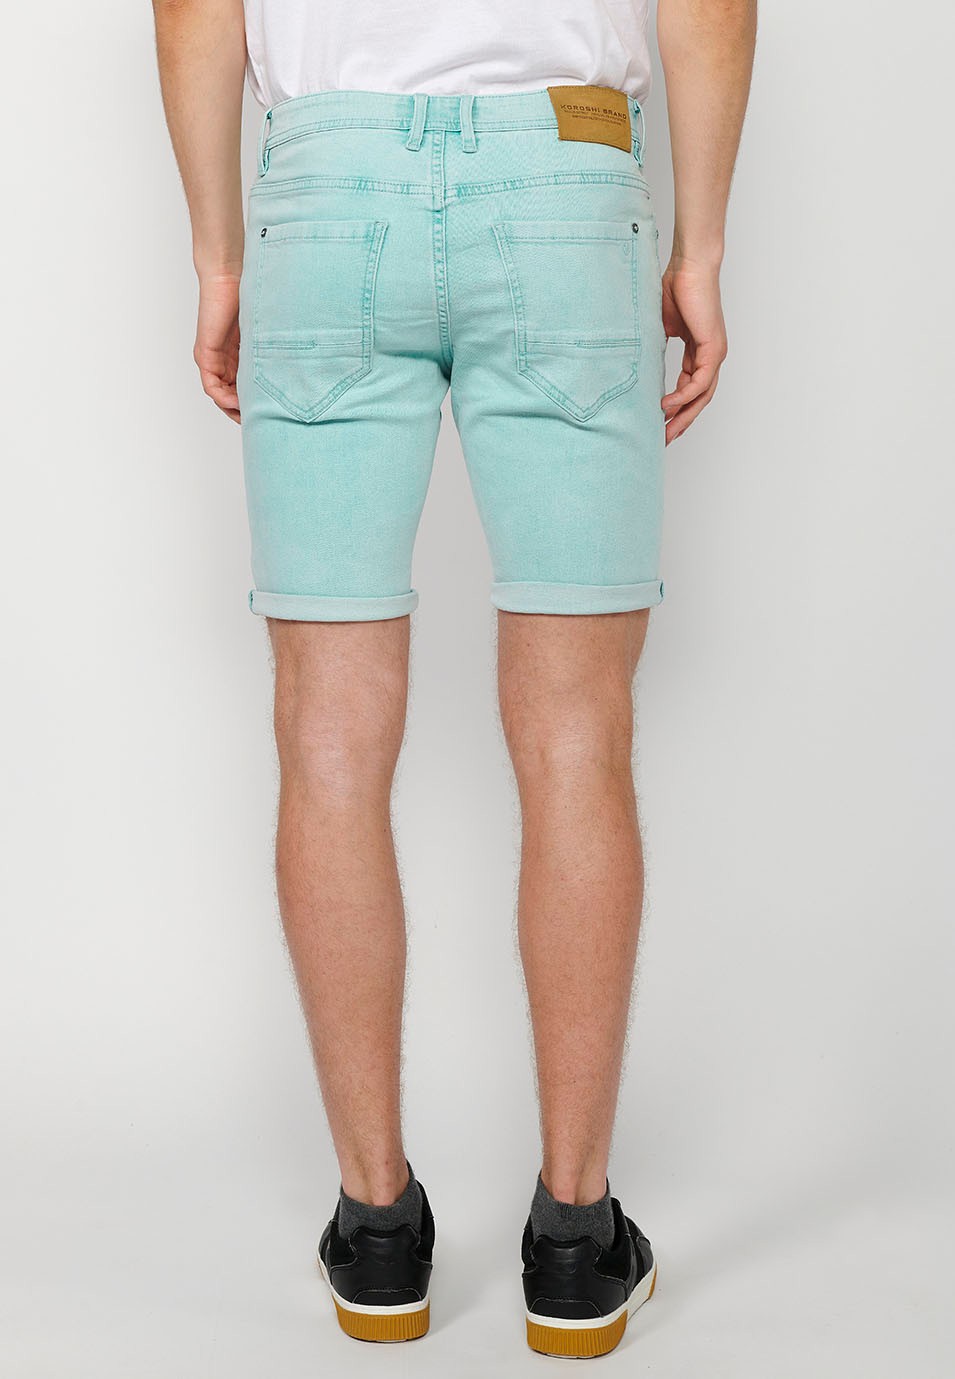 Shorts with turn-up closure with front zipper and button closure and five pockets, one blue pocket pocket for Men 6